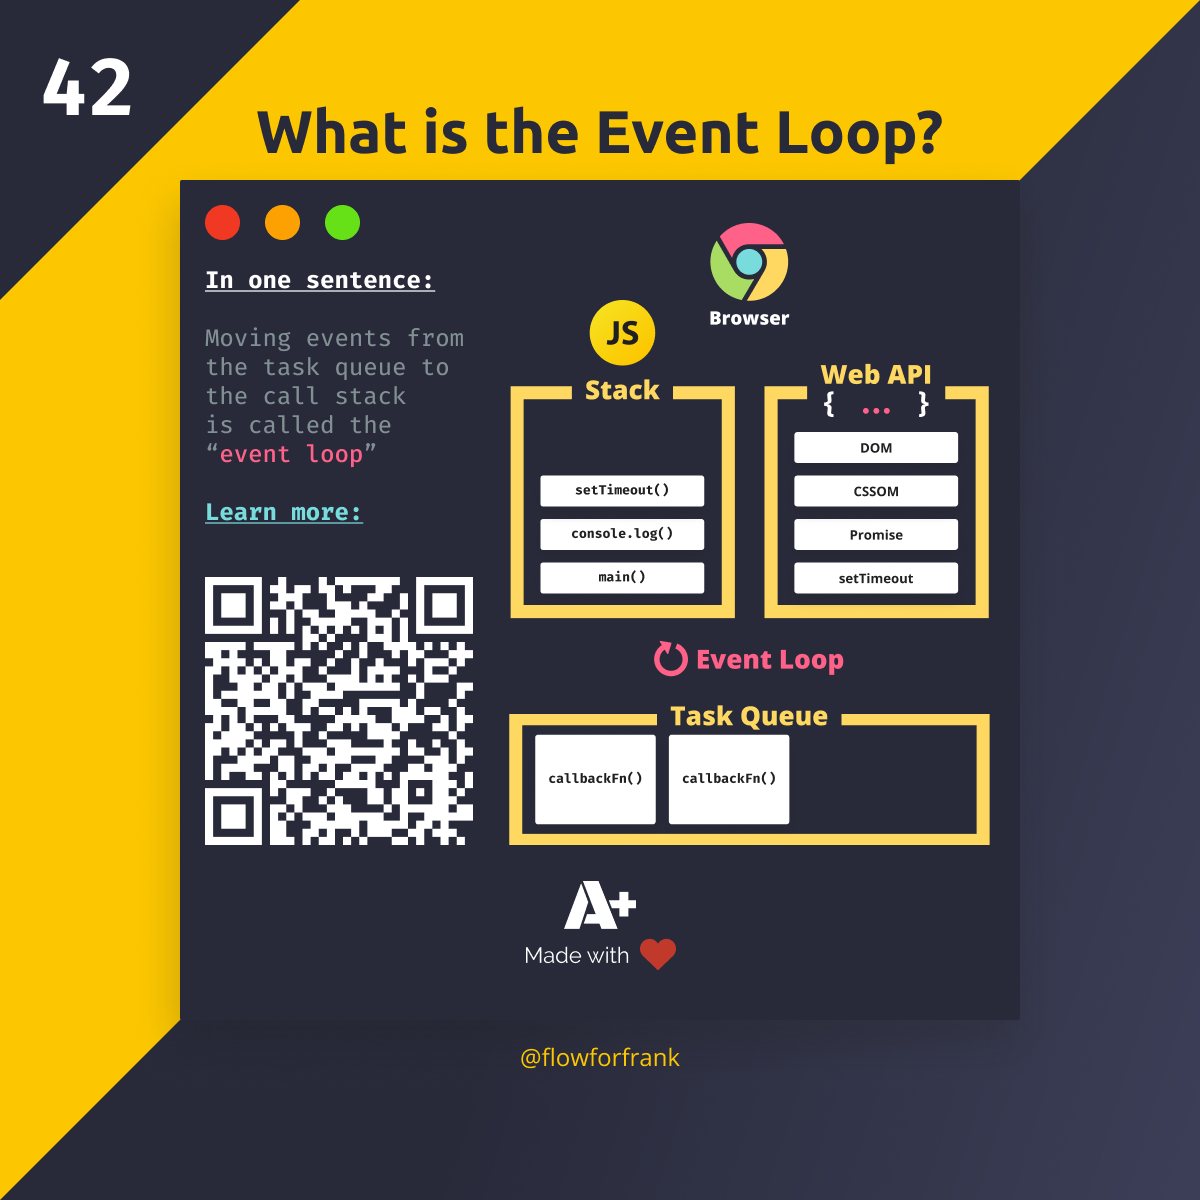 What is the event loop in JavaScript?